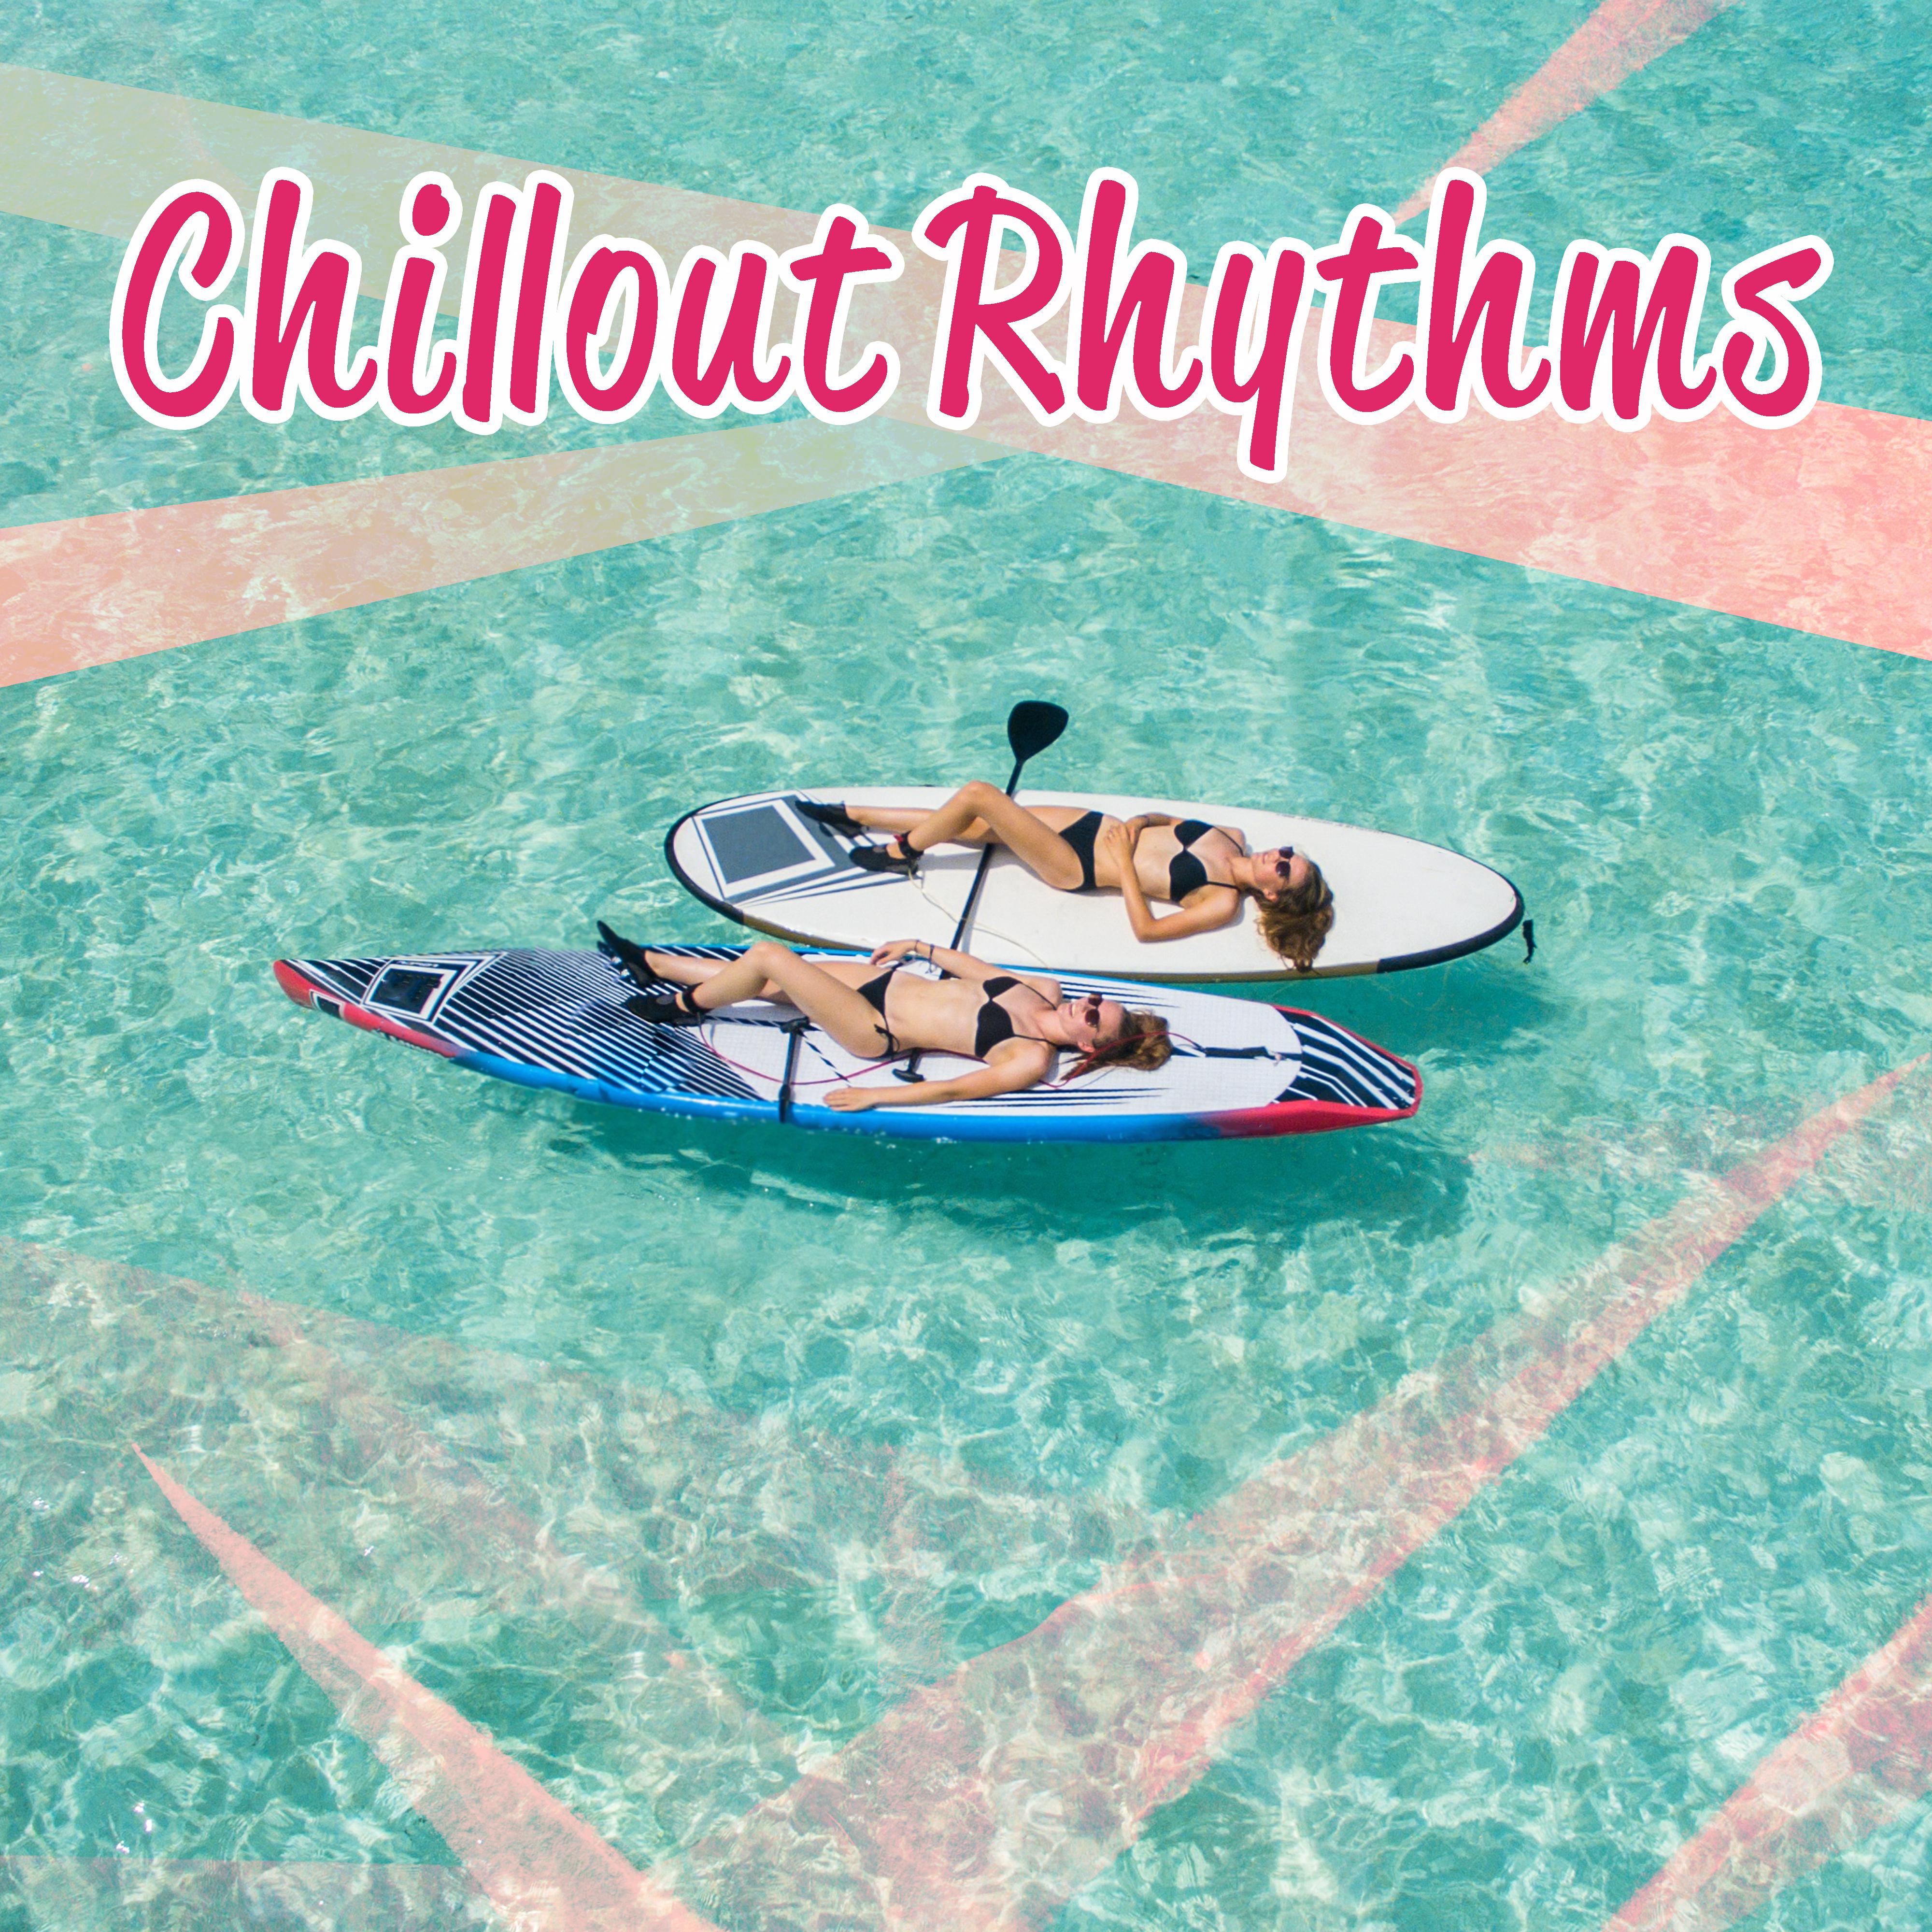 Chillout Rhythms  Essential Chill Out, Lounge, Relax, Summer Music, Cool Electronic Chillout